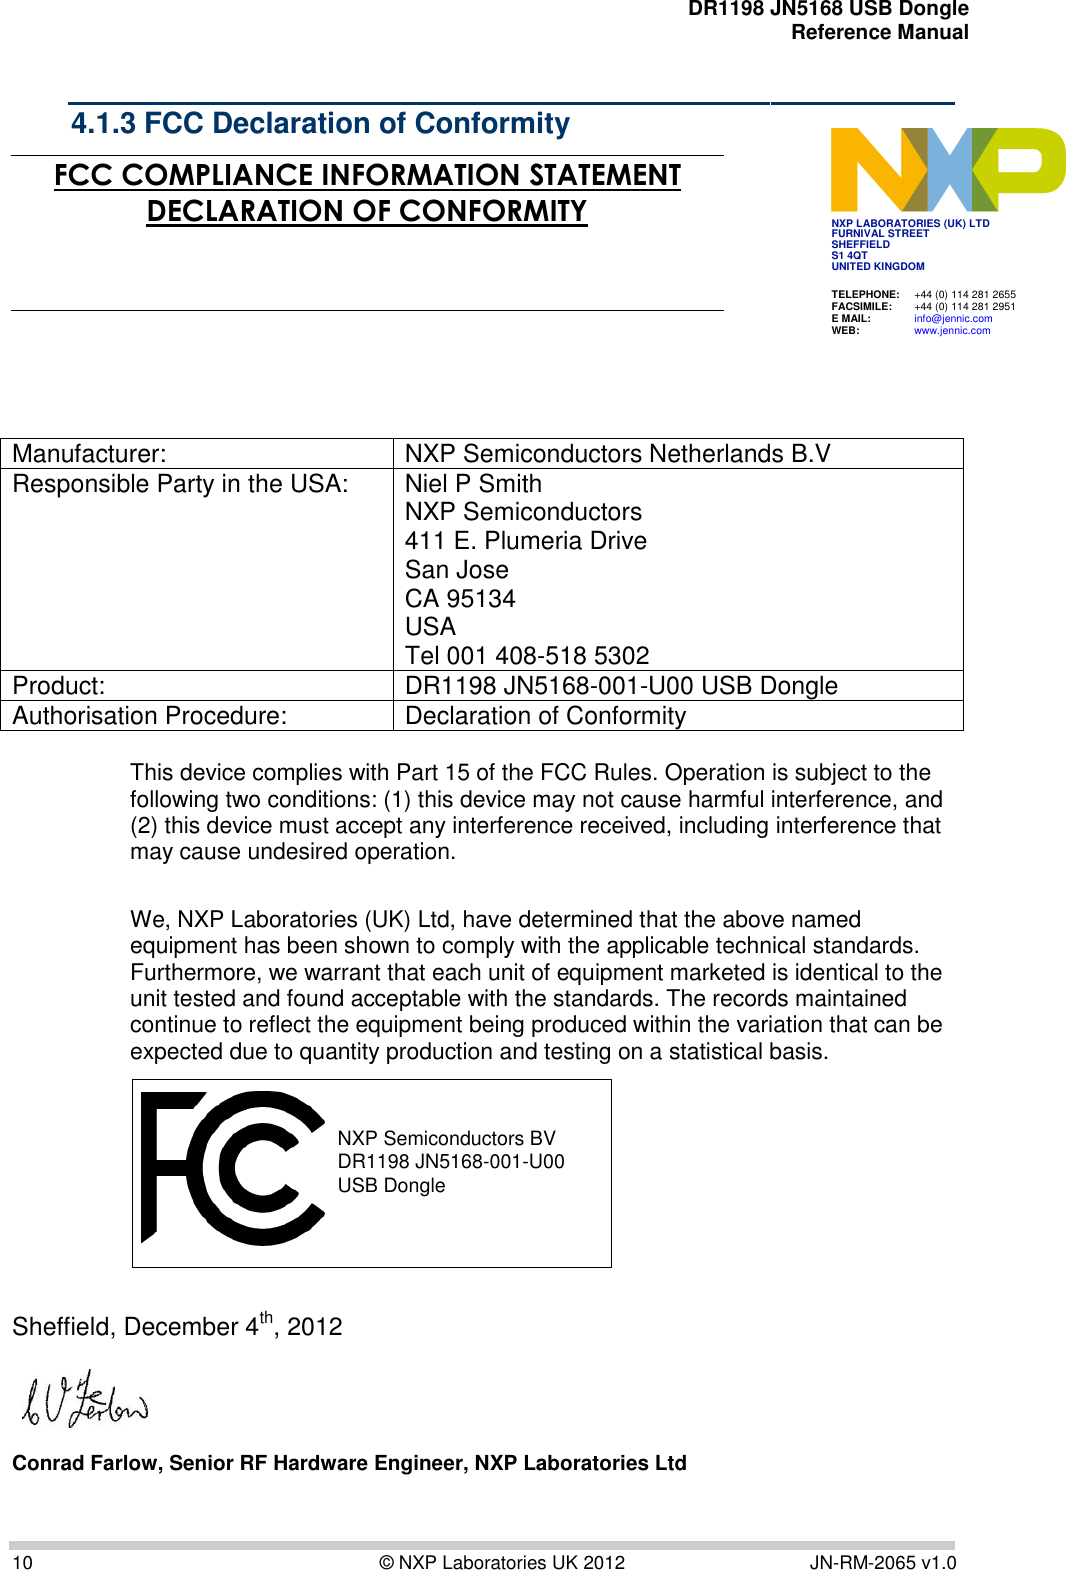    DR1198 JN5168 USB Dongle  Reference Manual  10  © NXP Laboratories UK 2012  JN-RM-2065 v1.0 4.1.3 FCC Declaration of Conformity JN5139-000-M00 JN5139-000-M01 JN5139-000-M02 JN5139-000-M03 JN5139-000-M04  FCC COMPLIANCE INFORMATION STATEMENT DECLARATION OF CONFORMITY        Manufacturer: NXP Semiconductors Netherlands B.V Responsible Party in the USA: Niel P Smith NXP Semiconductors  411 E. Plumeria Drive San Jose  CA 95134 USA Tel 001 408-518 5302 Product: DR1198 JN5168-001-U00 USB Dongle Authorisation Procedure: Declaration of Conformity  This device complies with Part 15 of the FCC Rules. Operation is subject to the following two conditions: (1) this device may not cause harmful interference, and (2) this device must accept any interference received, including interference that may cause undesired operation.  We, NXP Laboratories (UK) Ltd, have determined that the above named equipment has been shown to comply with the applicable technical standards. Furthermore, we warrant that each unit of equipment marketed is identical to the unit tested and found acceptable with the standards. The records maintained continue to reflect the equipment being produced within the variation that can be expected due to quantity production and testing on a statistical basis.  NXP Semiconductors BVDR1198 JN5168-001-U00 USB Dongle  Sheffield, December 4th, 2012                       Conrad Farlow, Senior RF Hardware Engineer, NXP Laboratories Ltd         TELEPHONE:  +44 (0) 114 281 2655 FACSIMILE:  +44 (0) 114 281 2951 E MAIL:  info@jennic.com WEB:  www.jennic.com  NXP LABORATORIES (UK) LTD FURNIVAL STREET SHEFFIELD S1 4QT UNITED KINGDOM  